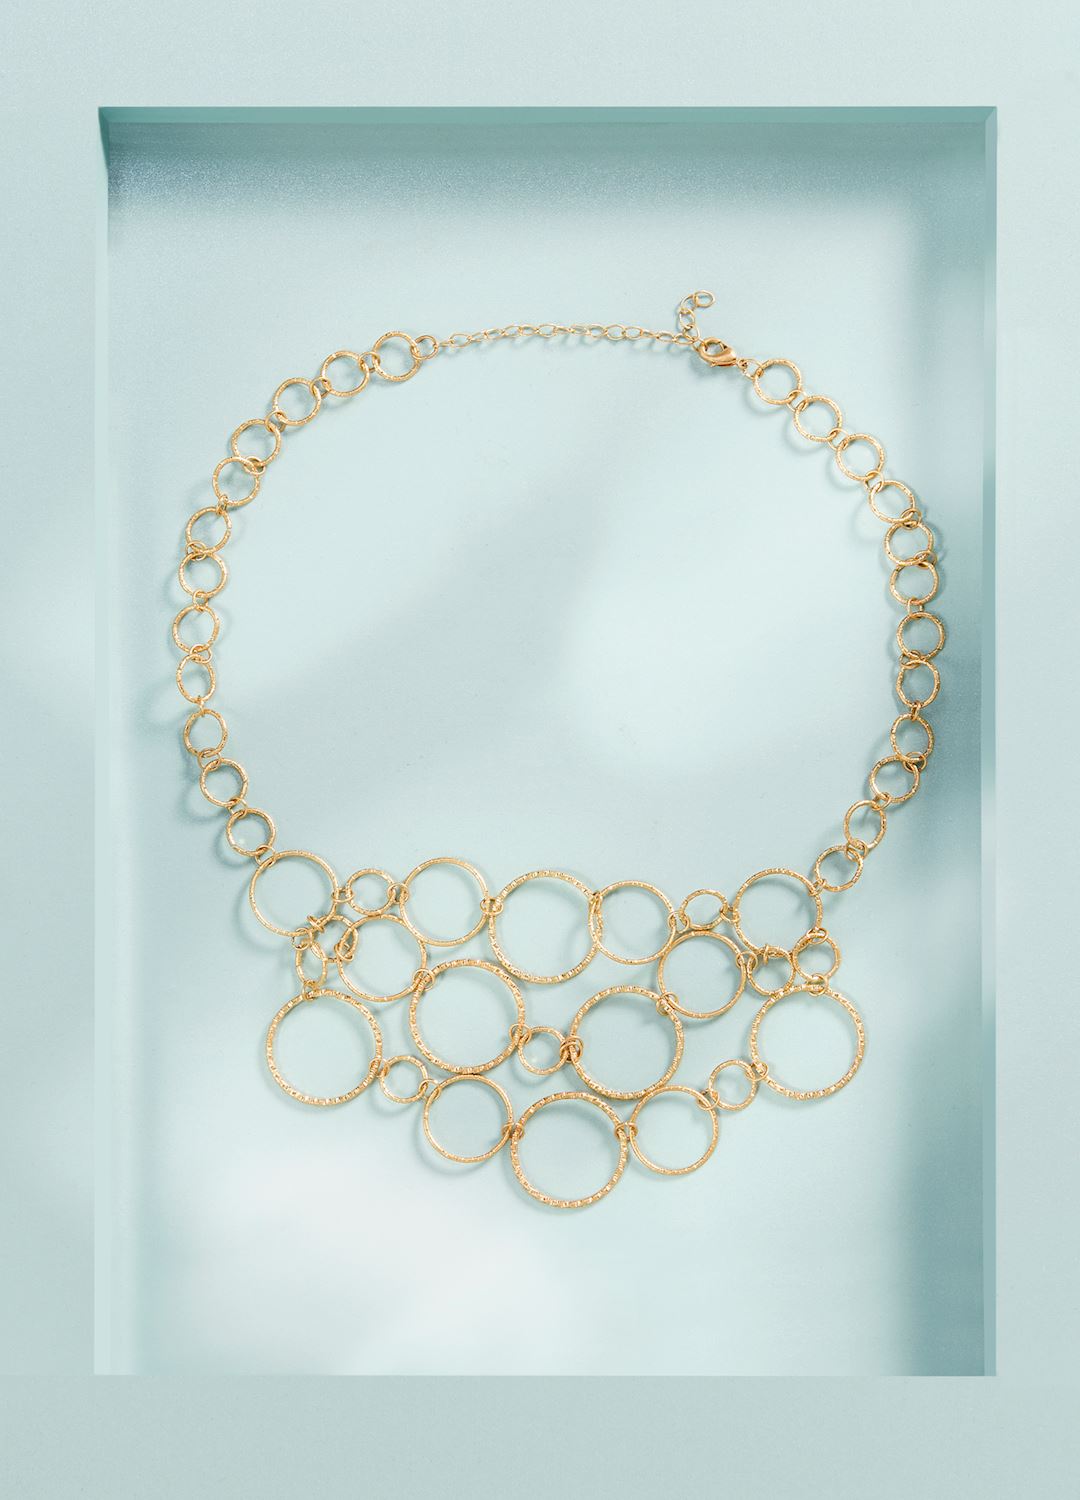 Gold Iron Multi-Ring Necklace